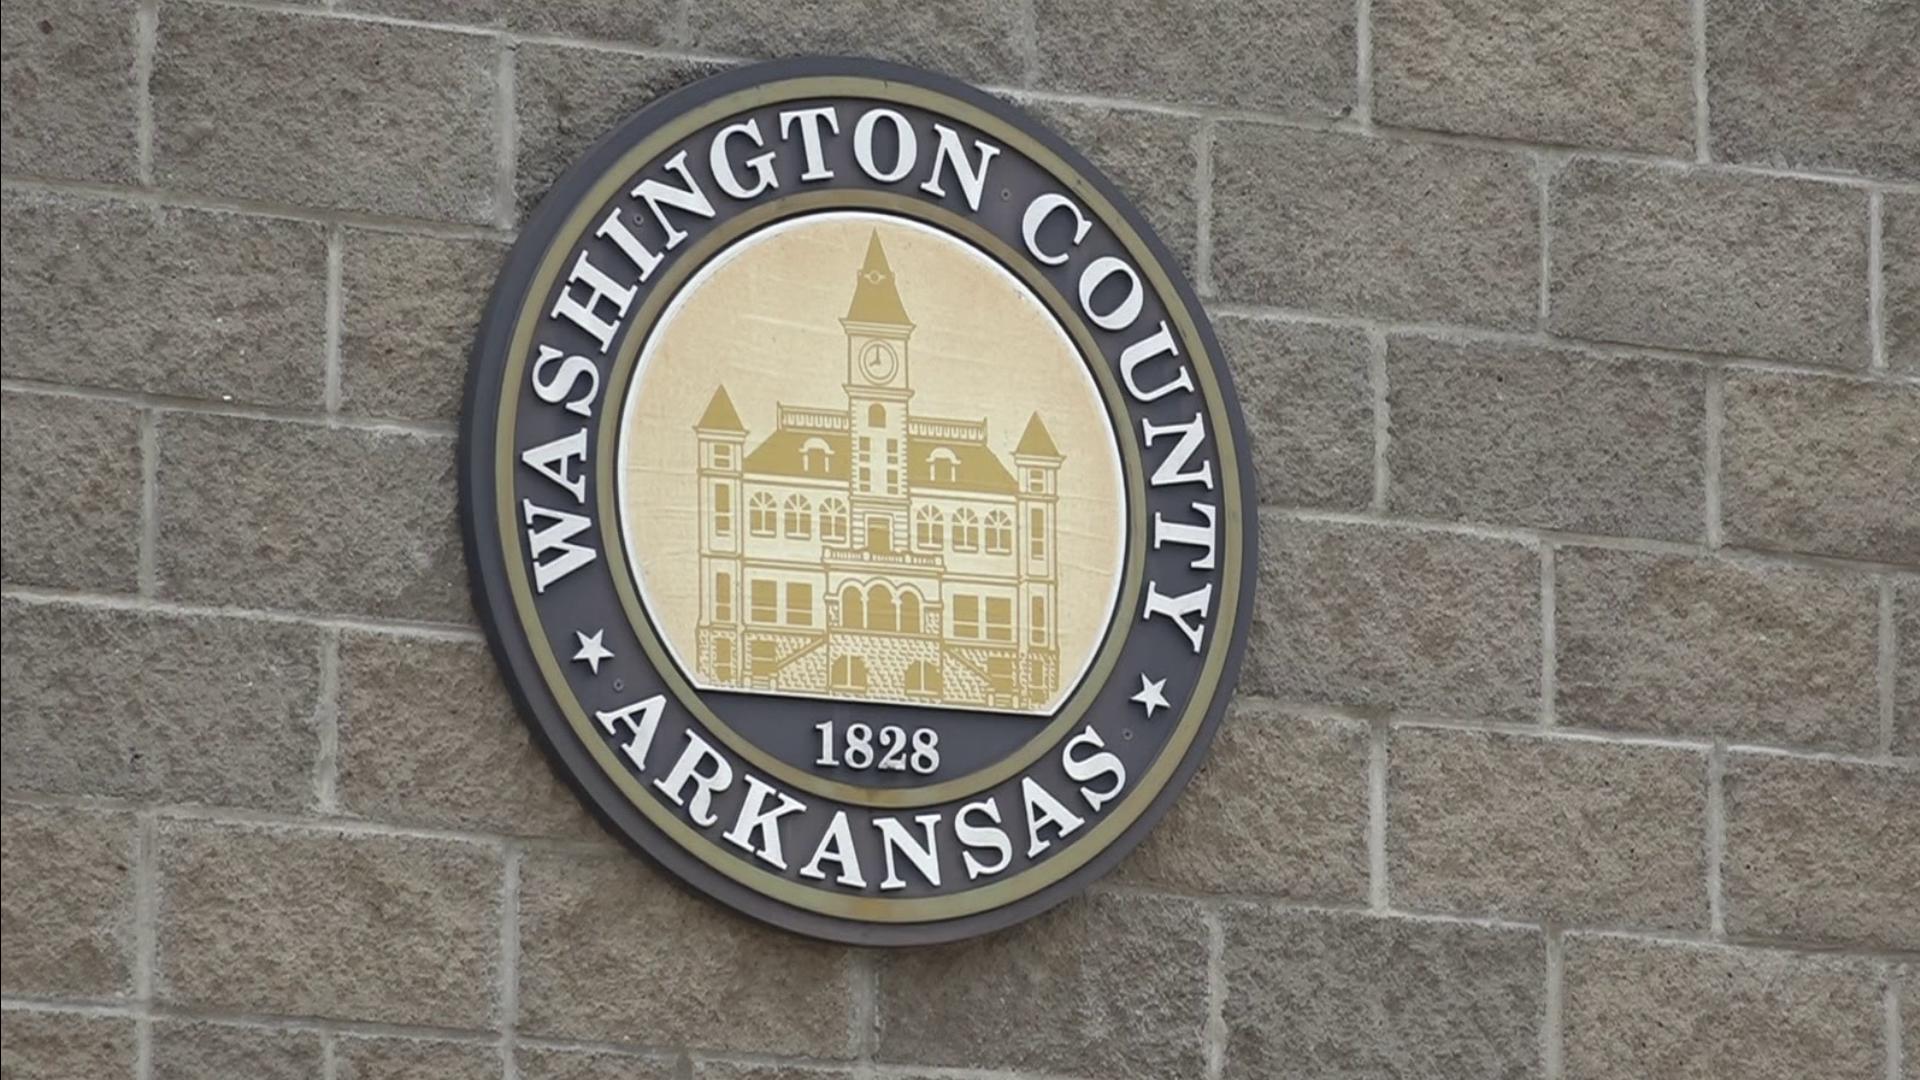 Just last month we reported Washington County's CSU was closing at the end of June, but UAMS has shut down the CSU ahead of schedule.